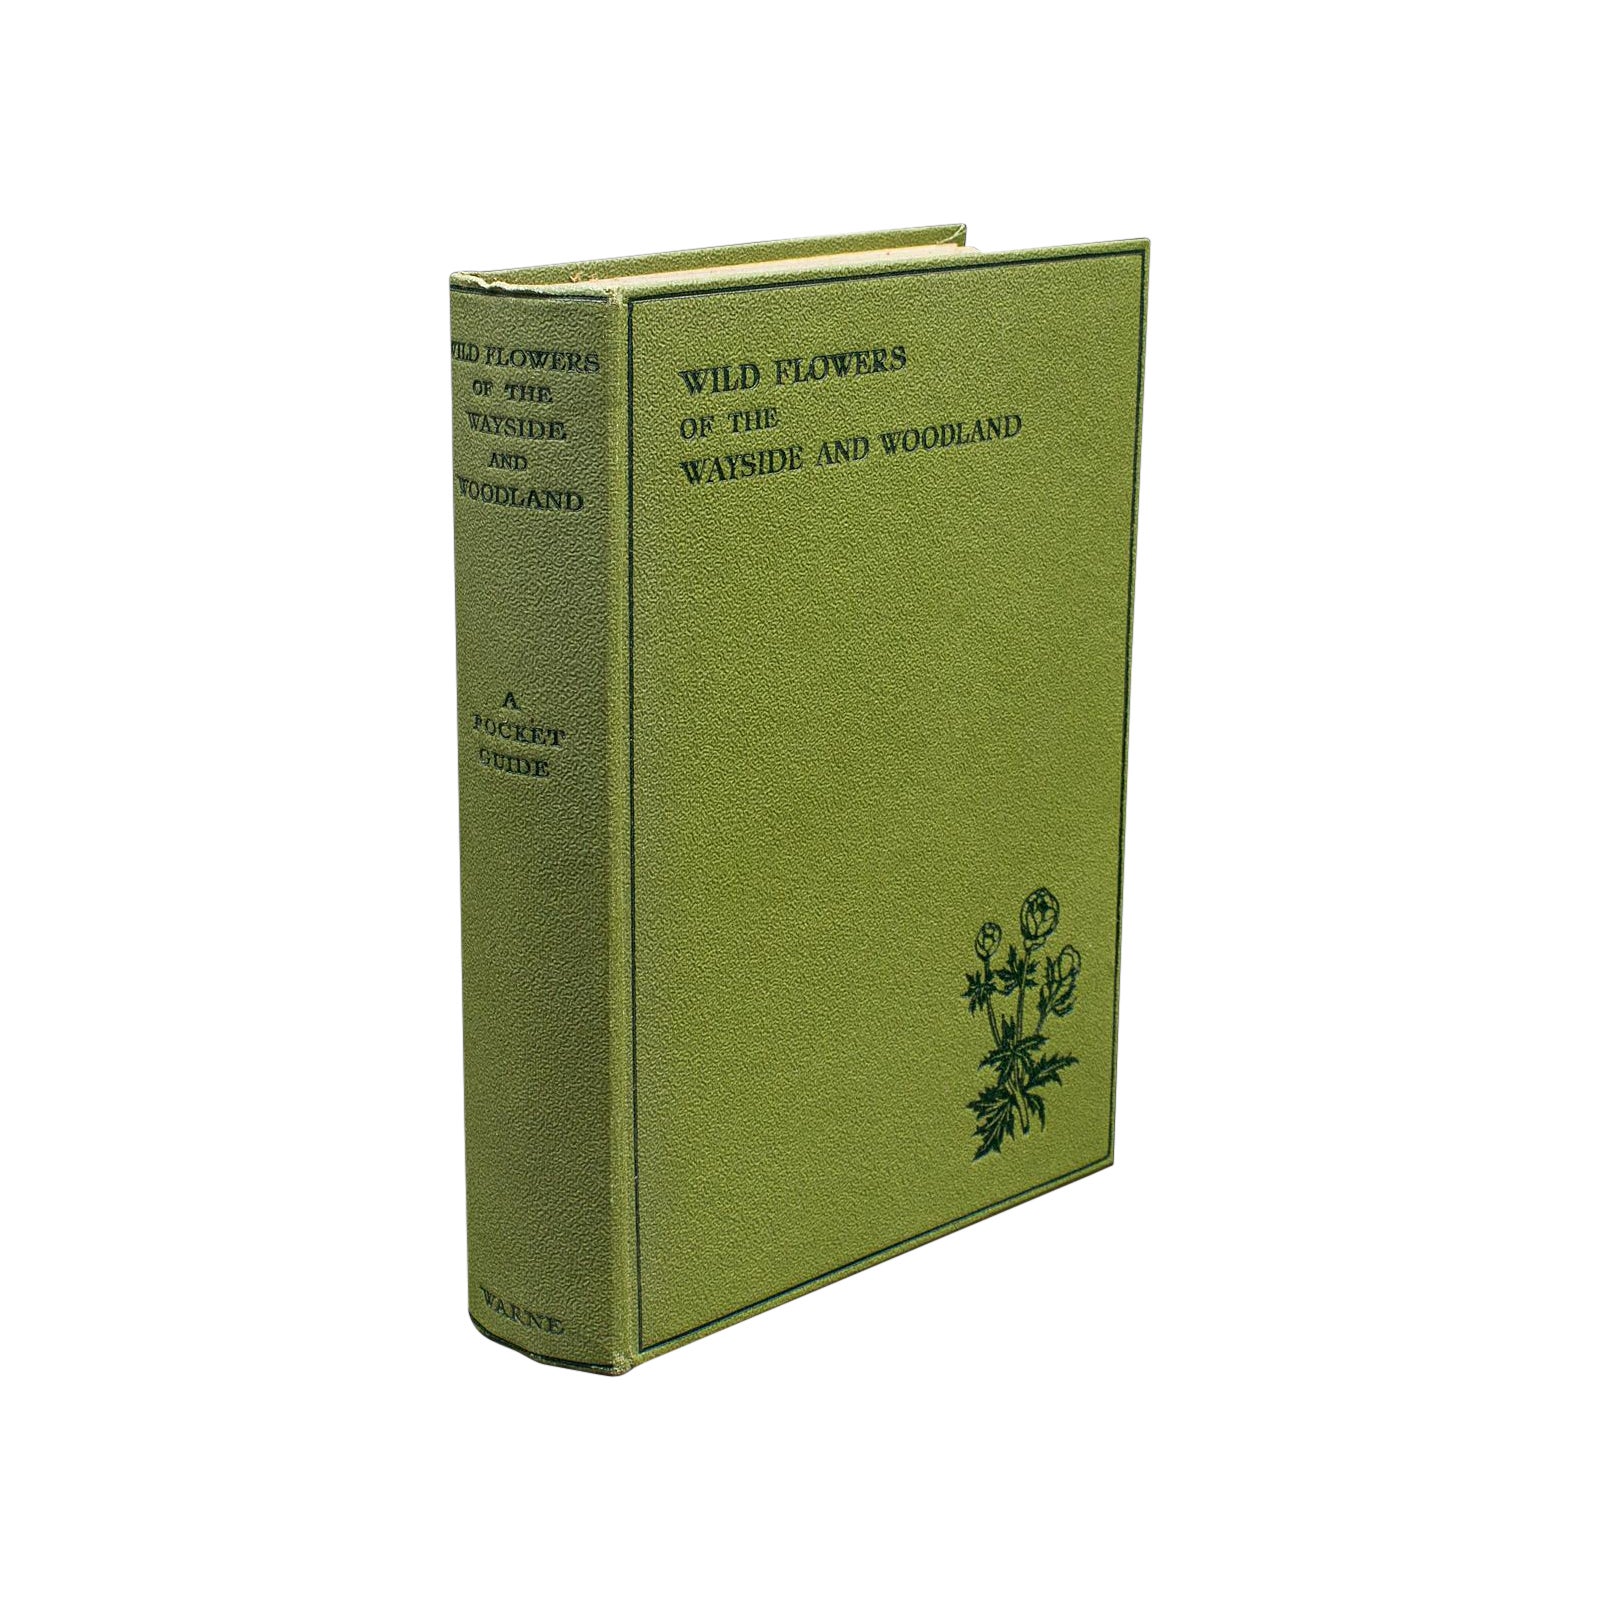 Vintage Reference Book, Wild Flowers of the Wayside, English, Botanical Guide For Sale